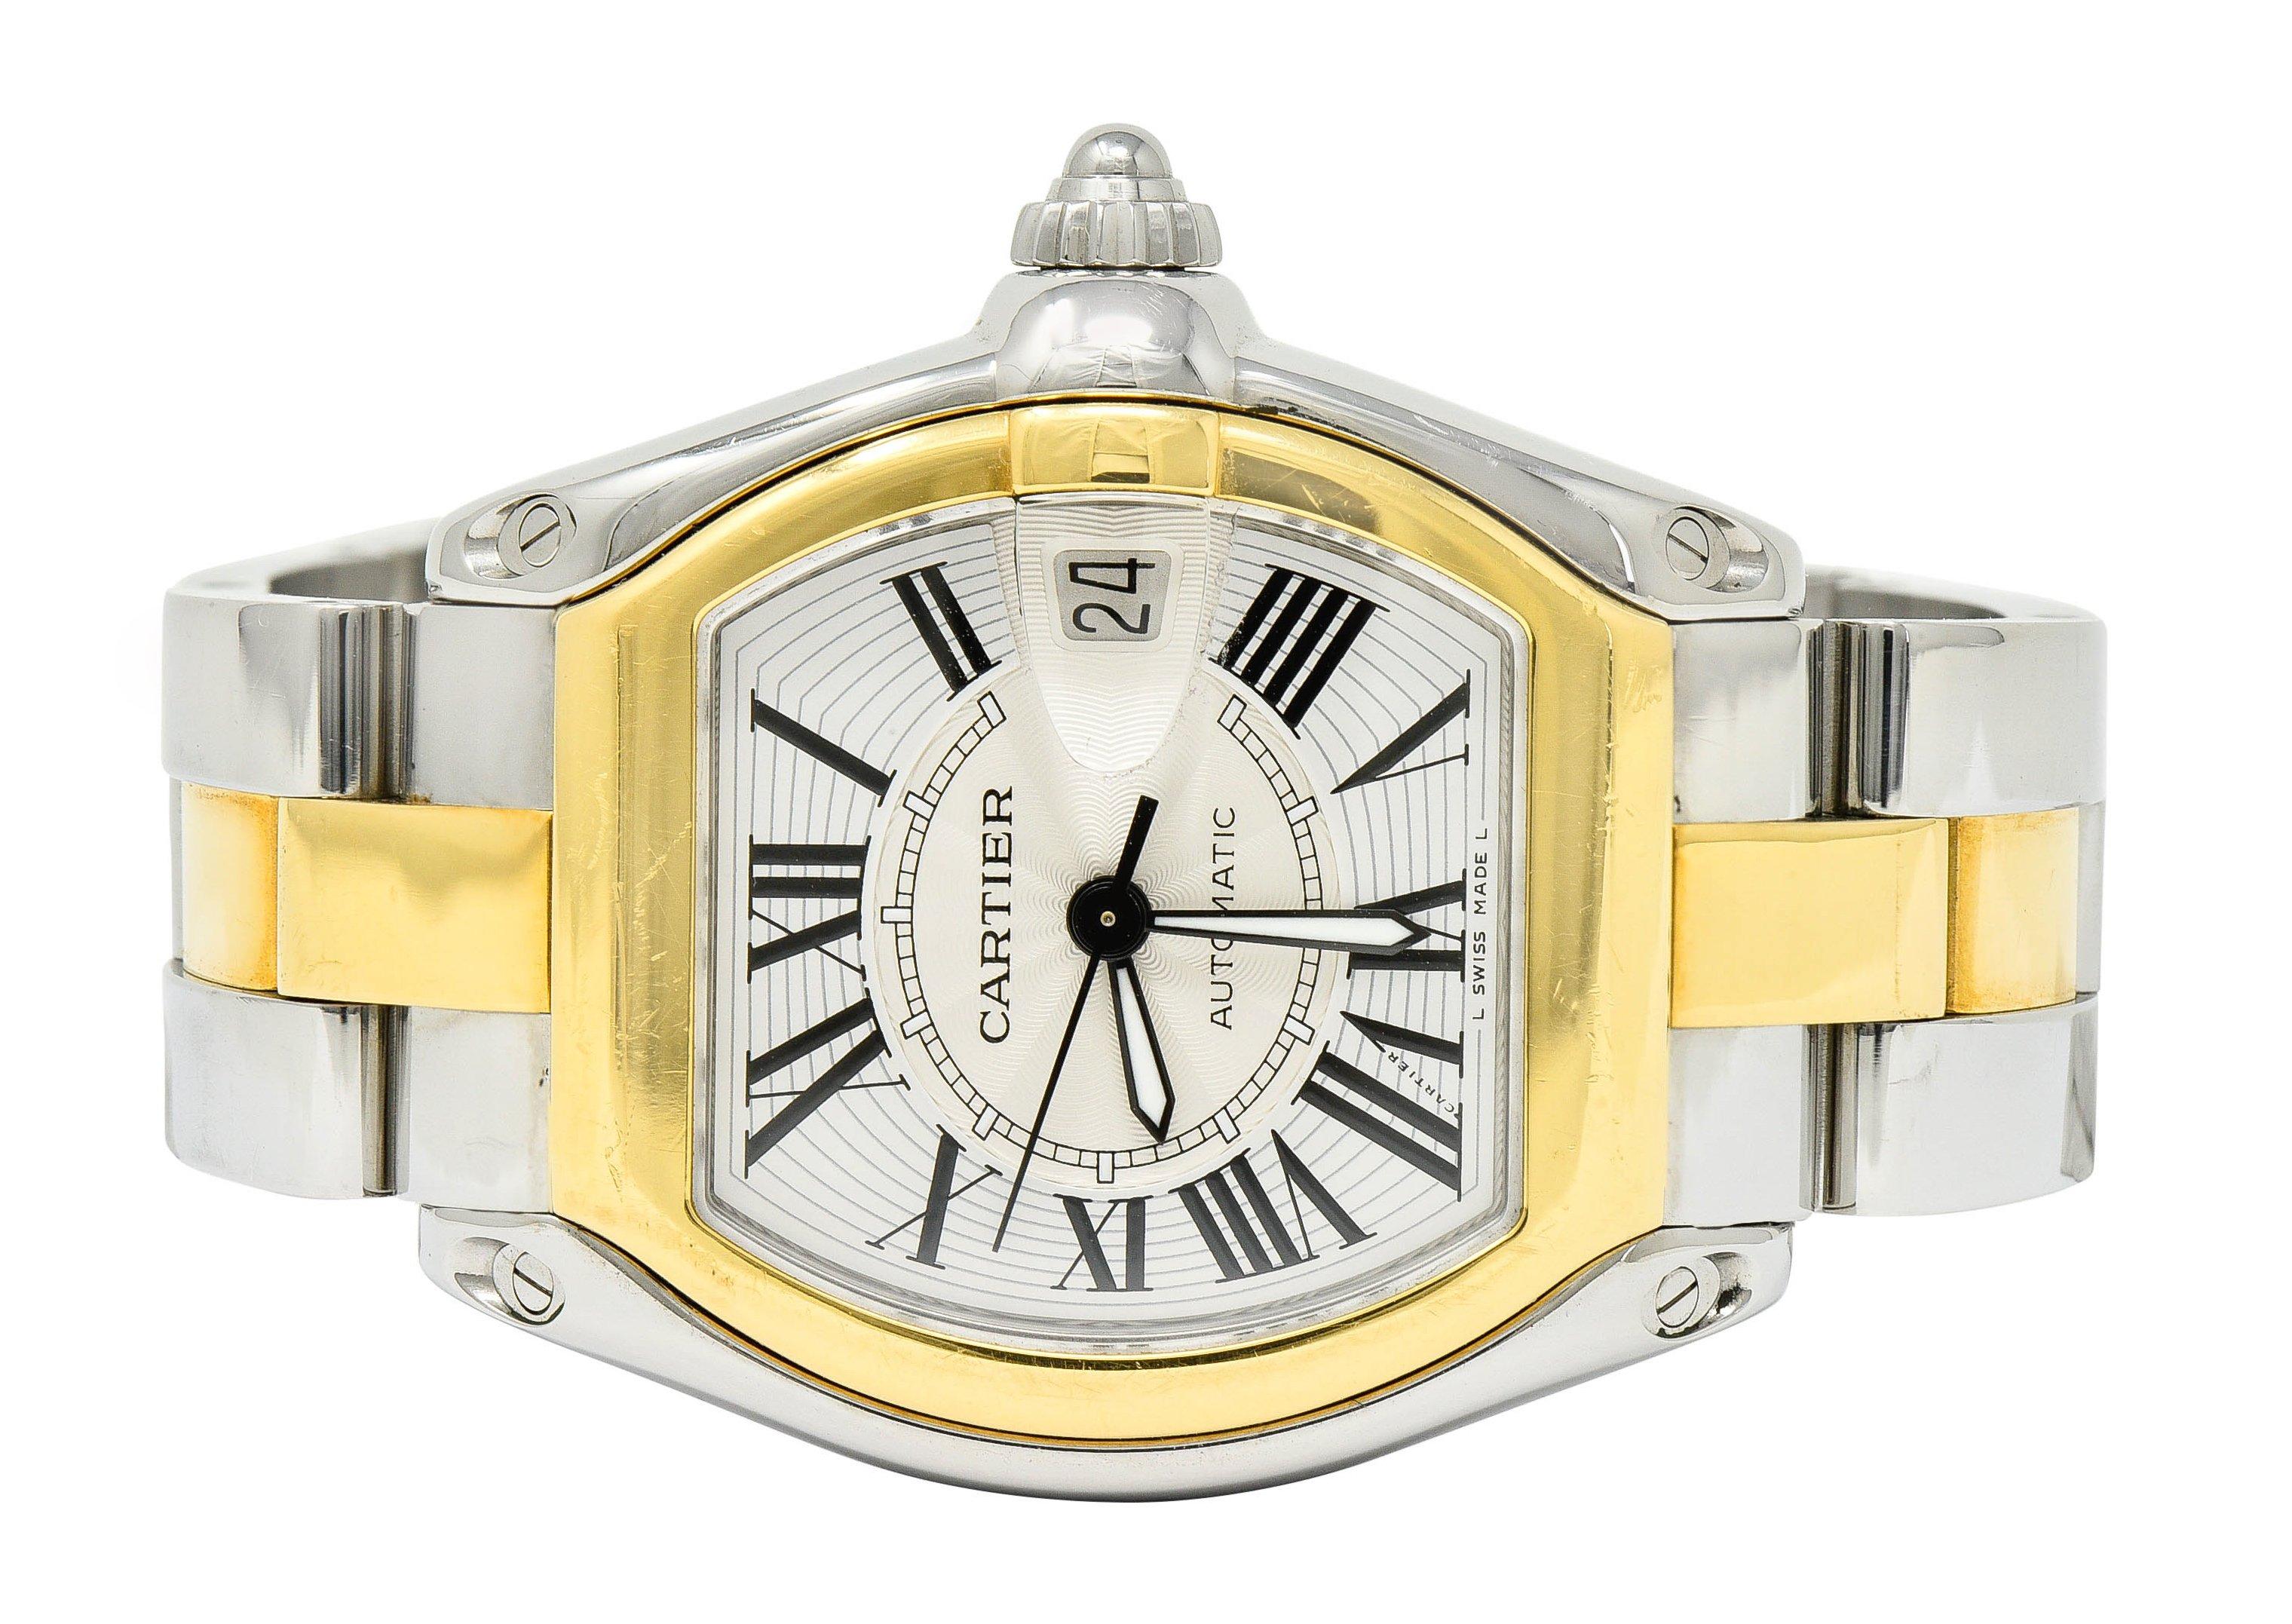 Watch designed as a silver two-tone yellow gold case with 18 Karat yellow gold accented bracelet

Silver dial with Roman numeral hour markers and black hands

Automatic movement 

37 mm case, 10 mm case thickness, 19 mm band width

Length: 7 Inches